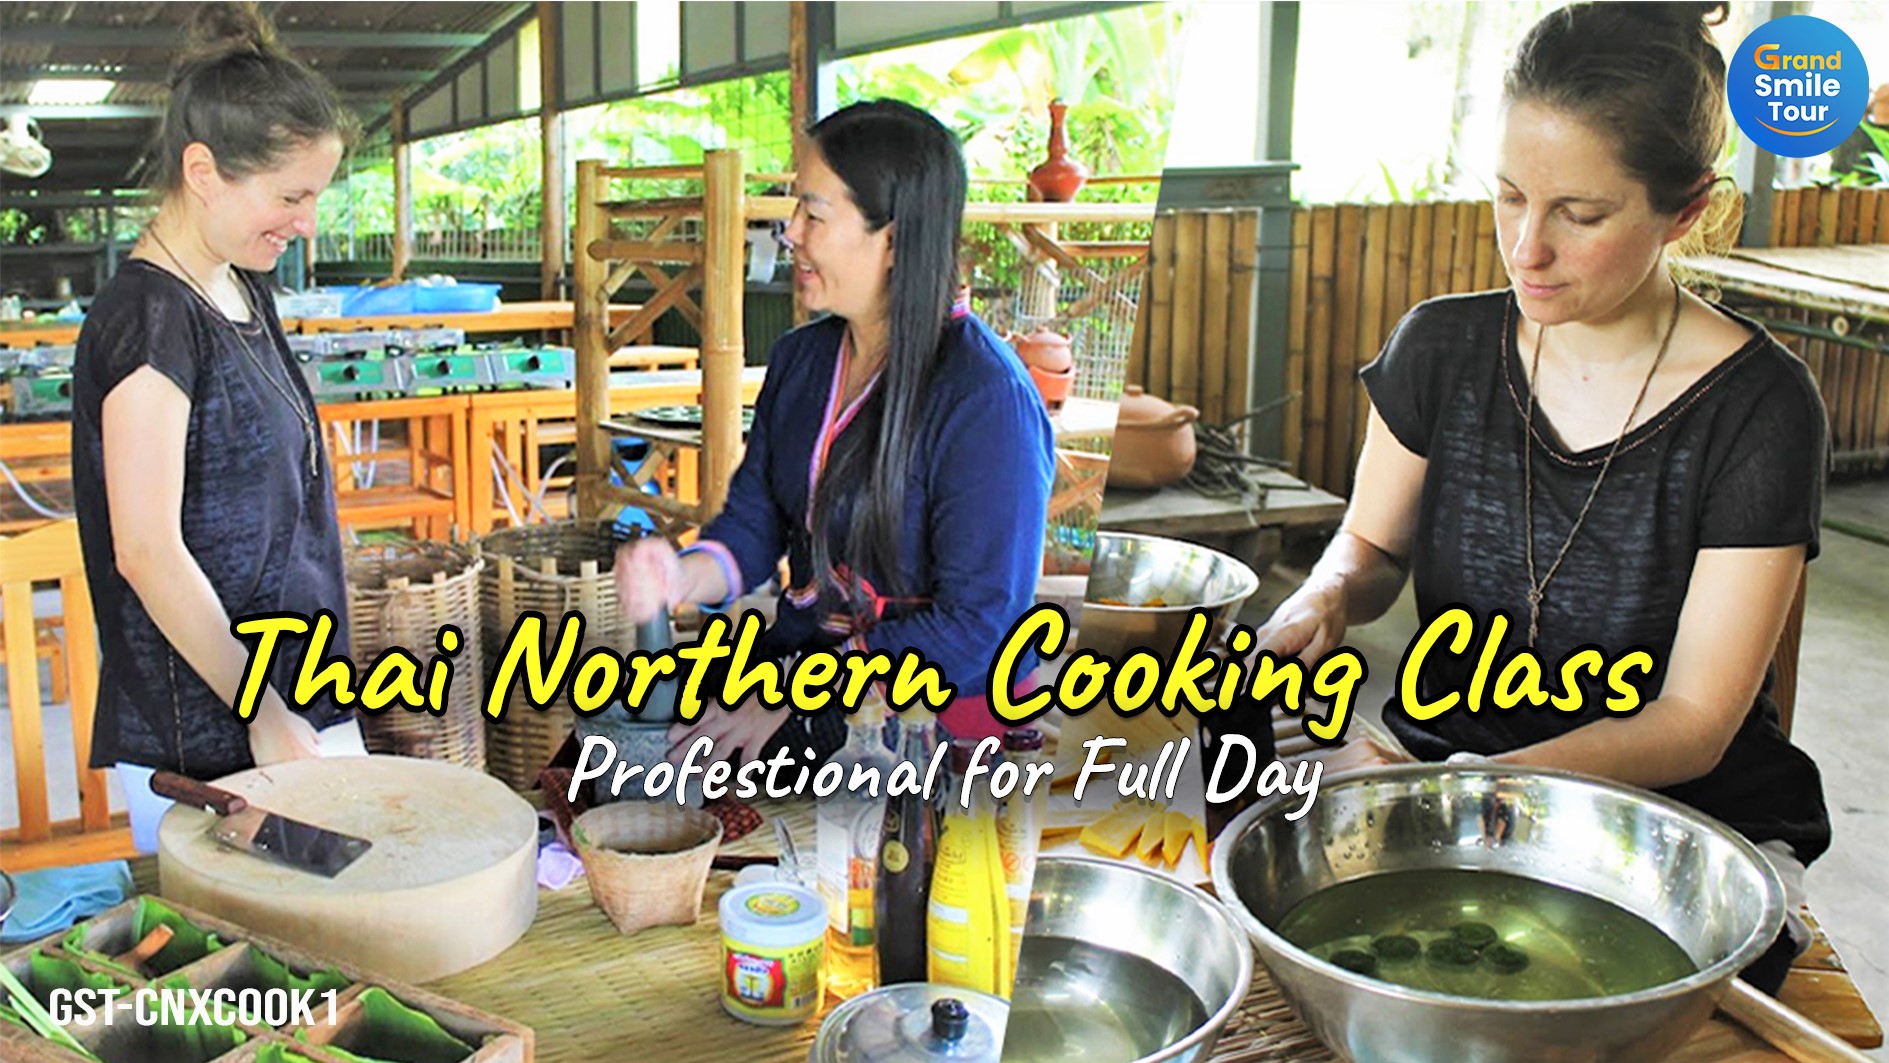 GST-CNXCOOK1 Full Day Thai Northern Cooking Class